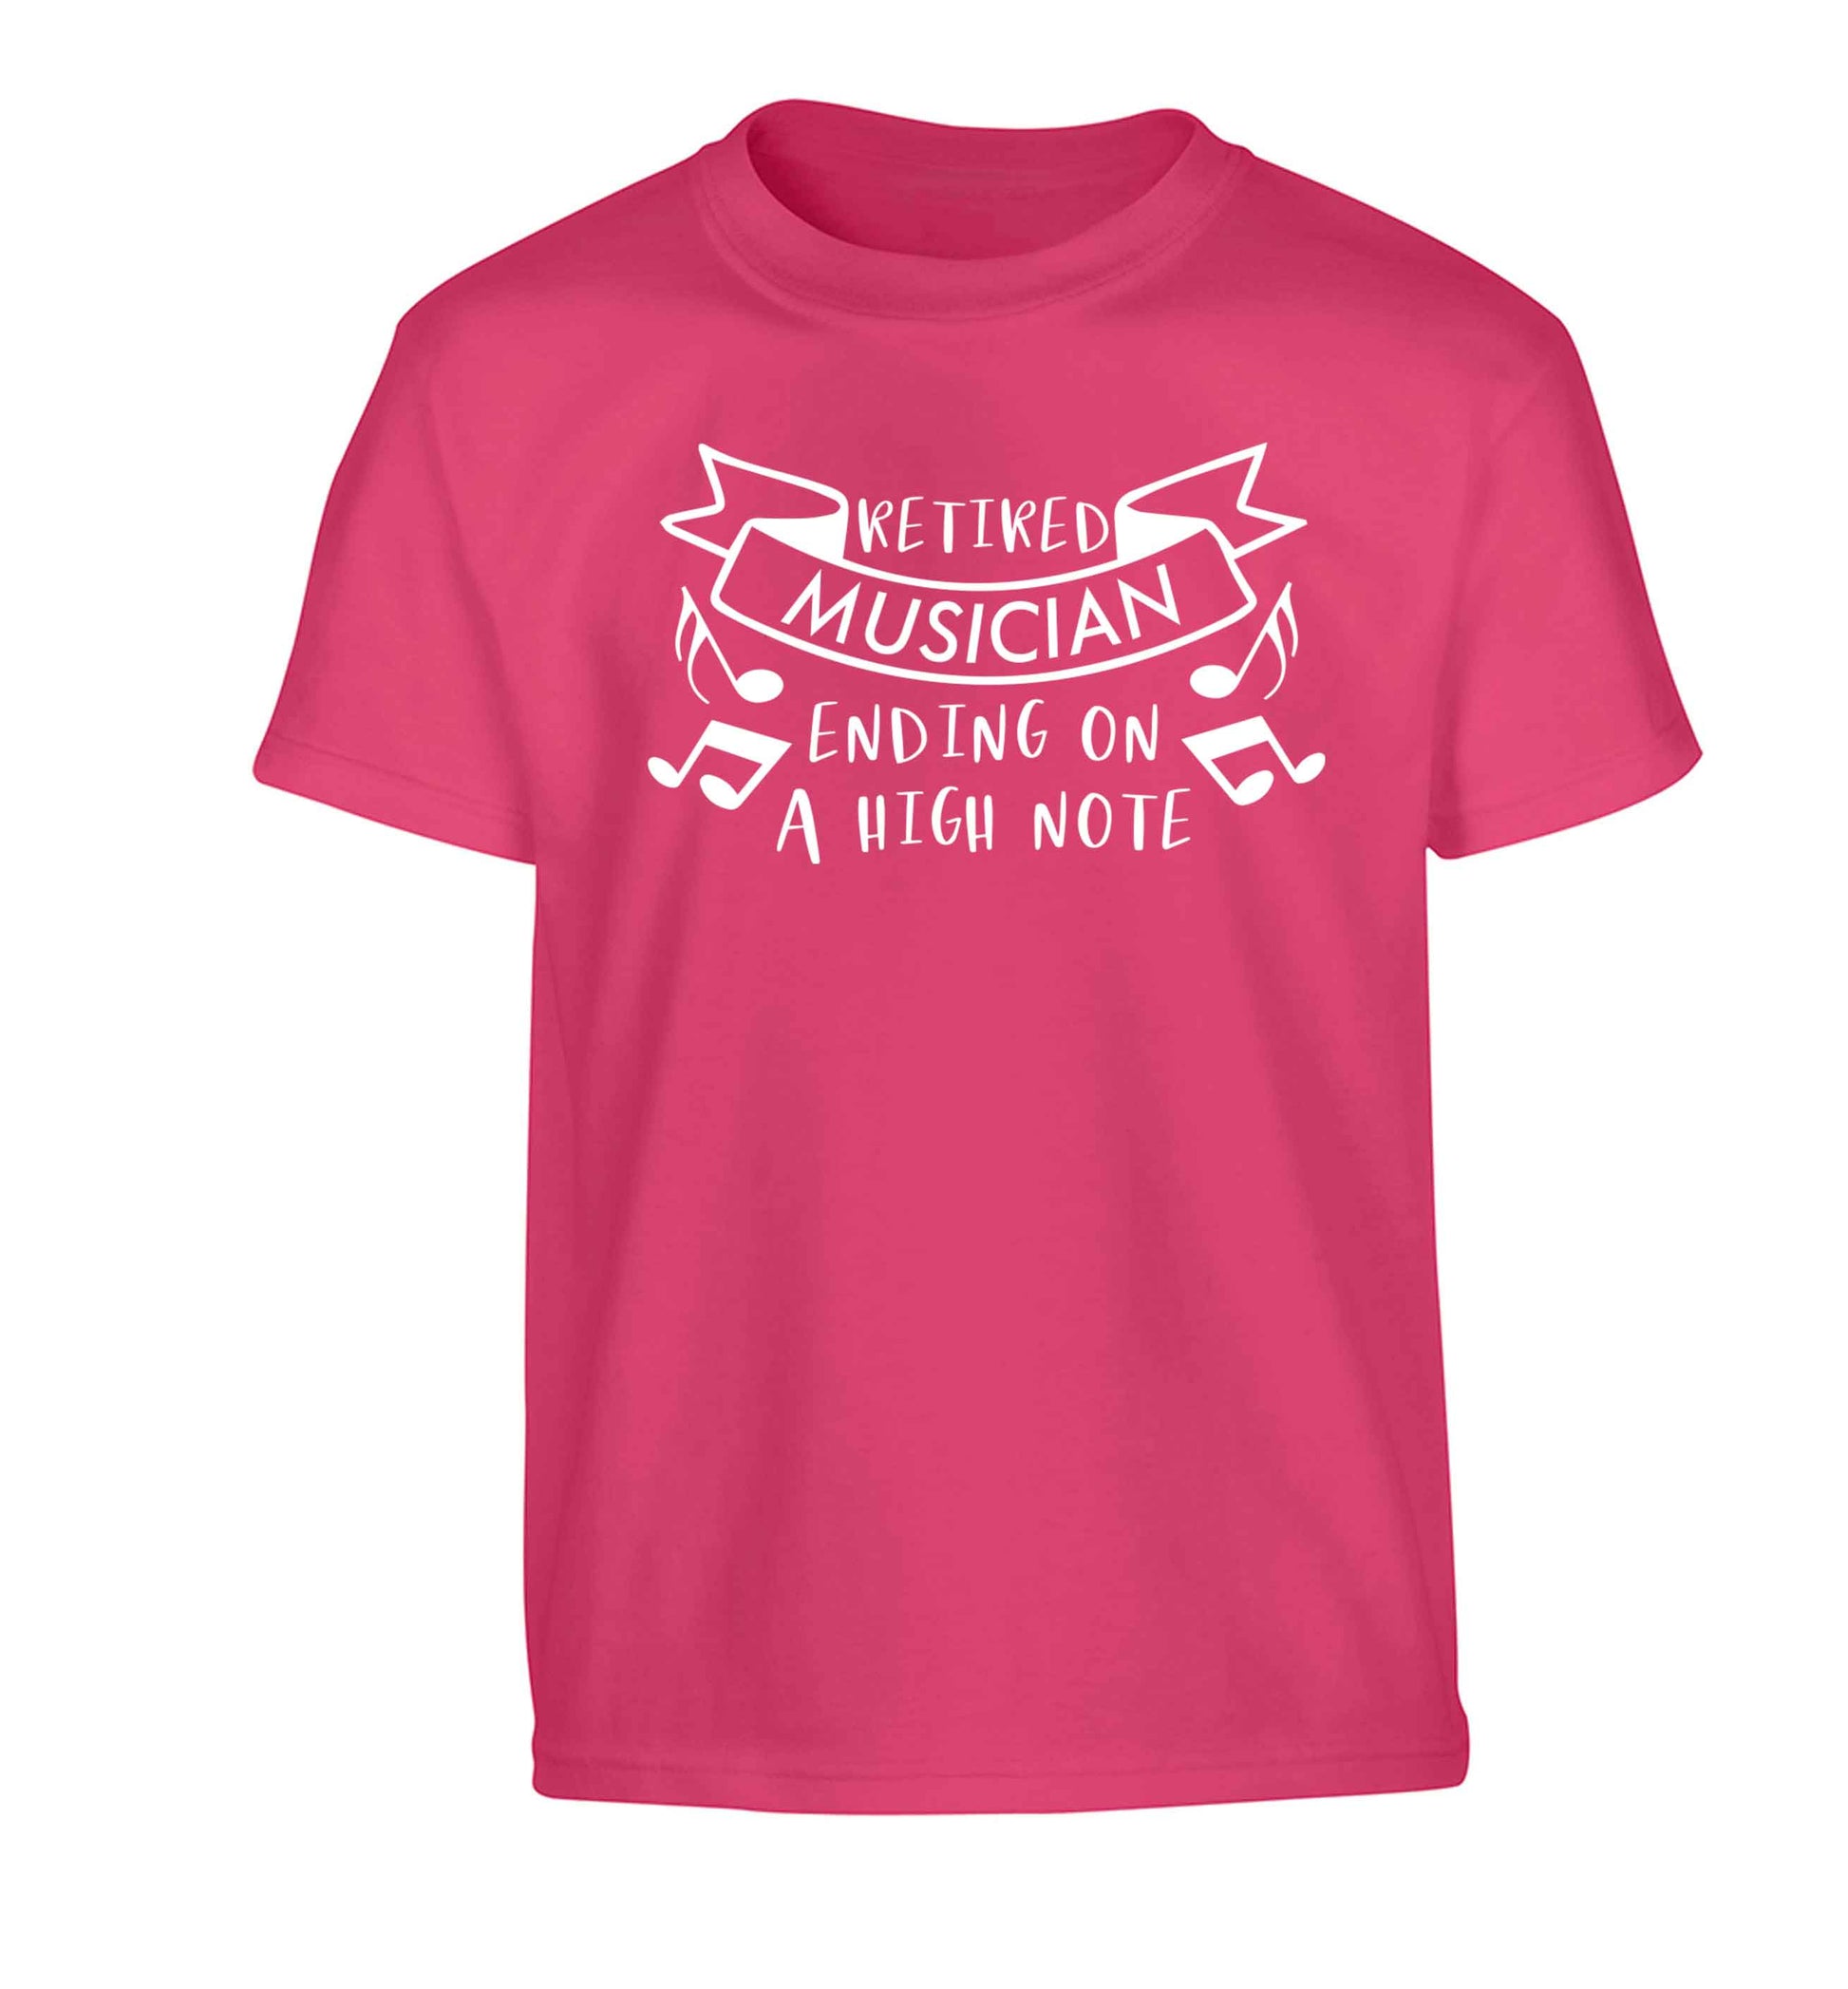 Retired musician ending on a high note Children's pink Tshirt 12-13 Years